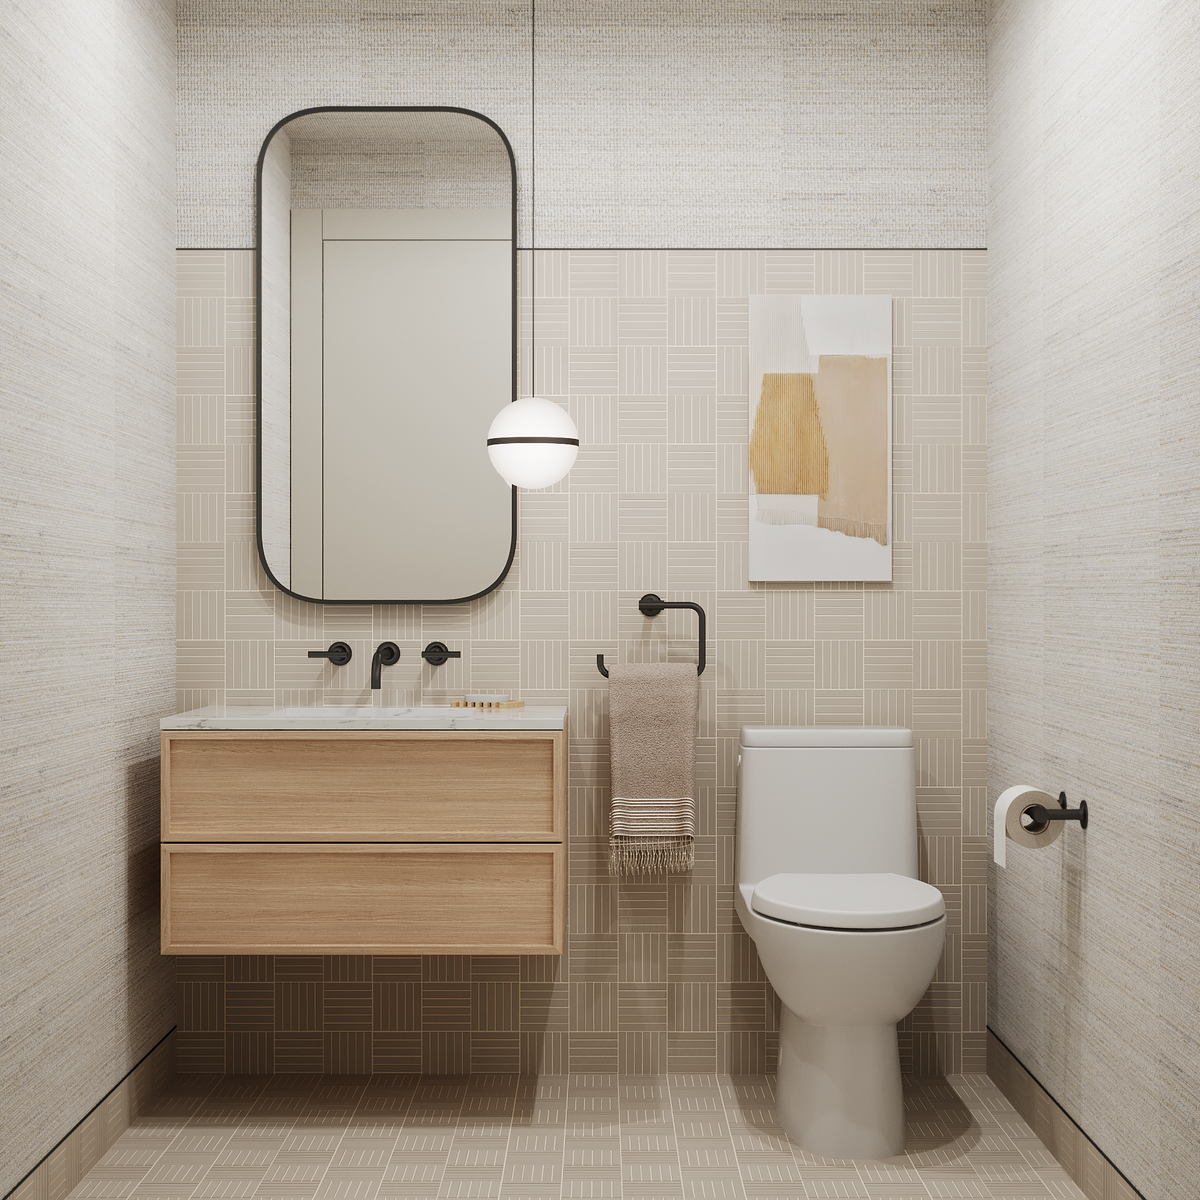 Terra Losa Bathroom Collection with Neutral Color Palette and Black Accents